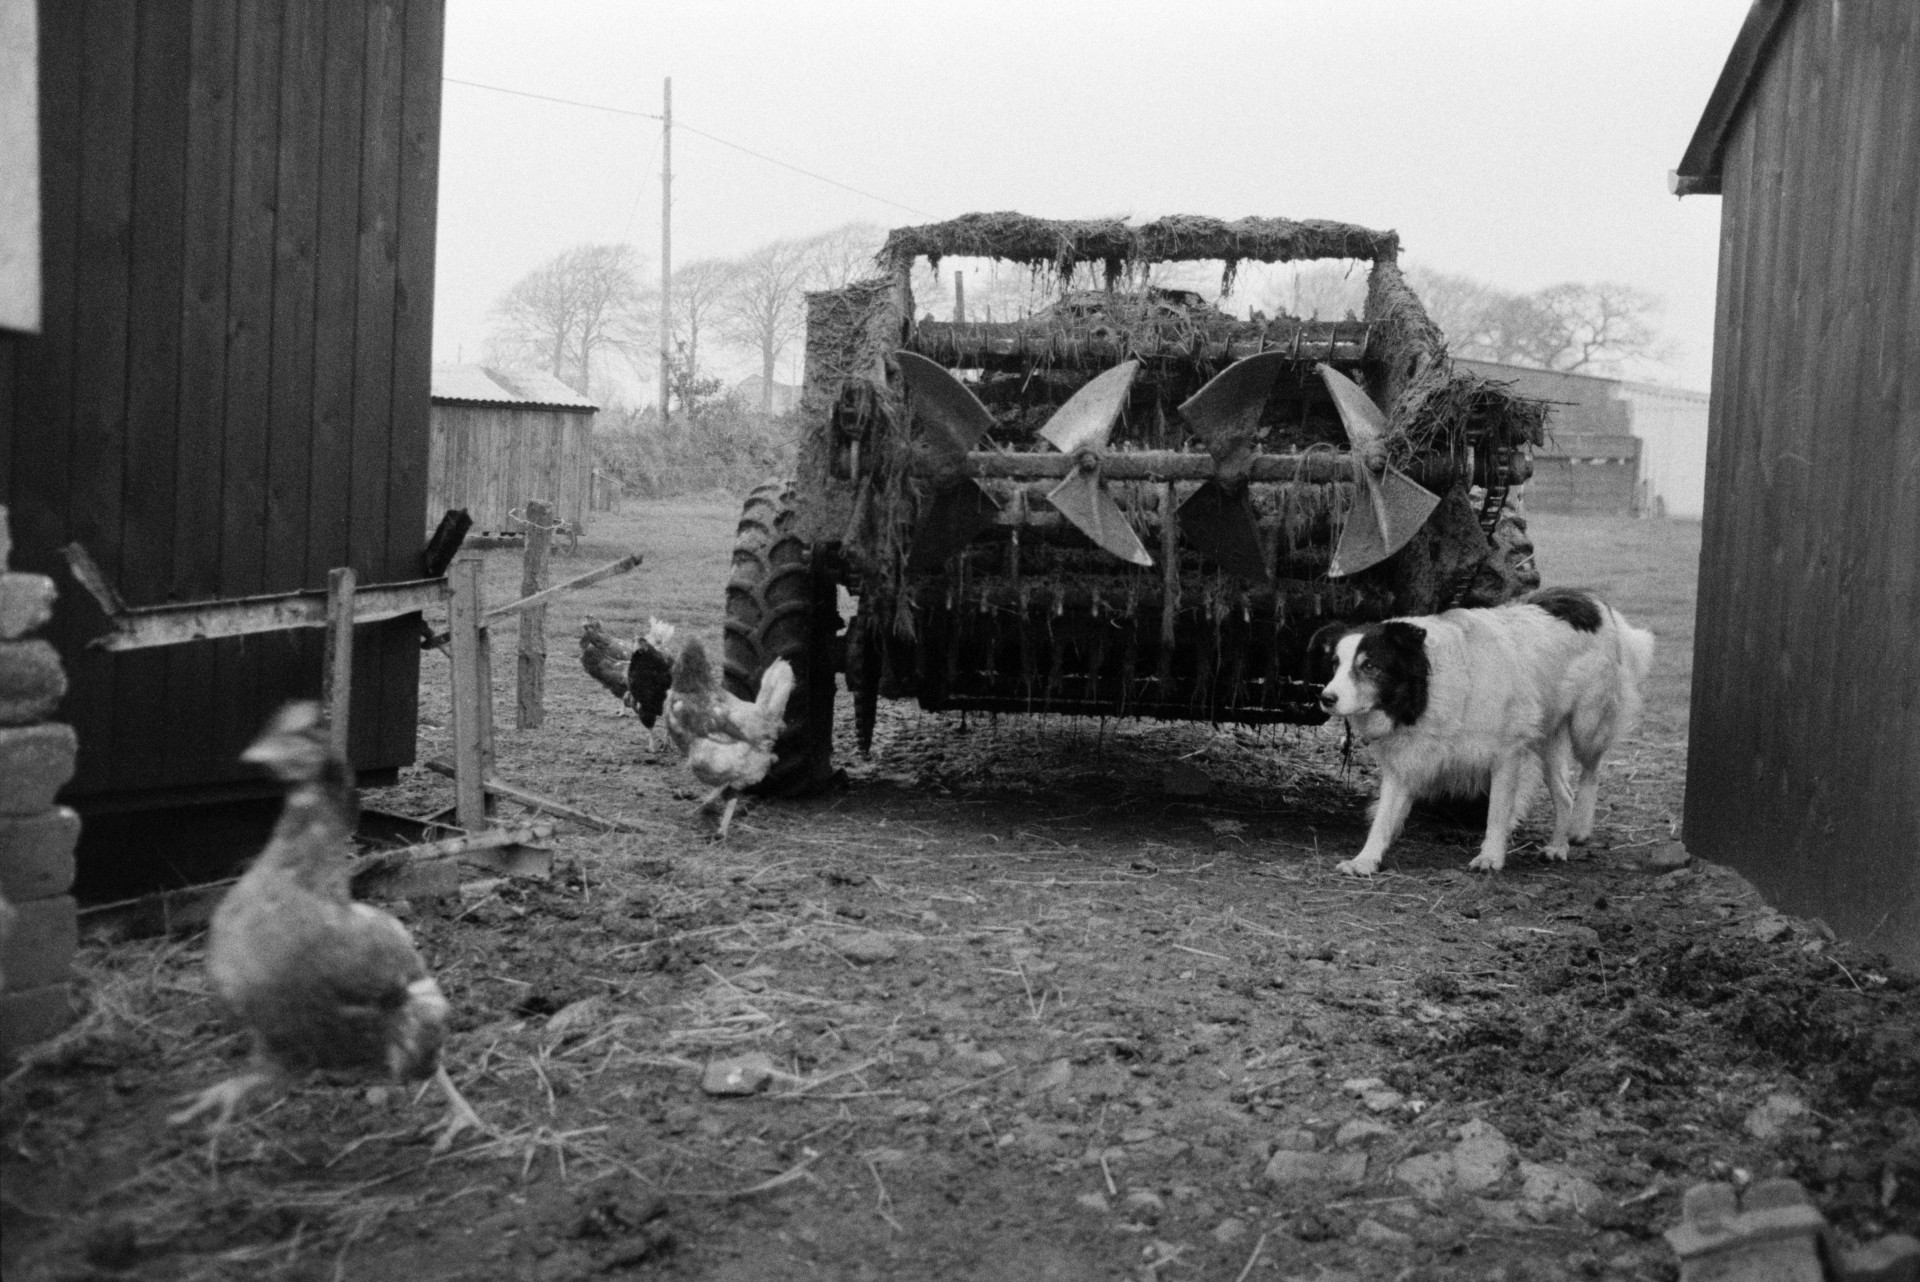 Chickens roaming around a farmyard by a muck spreader at Mill Road Farm, Beaford. A dog is about to chase the chickens. The farm was also known as Jeffrys.